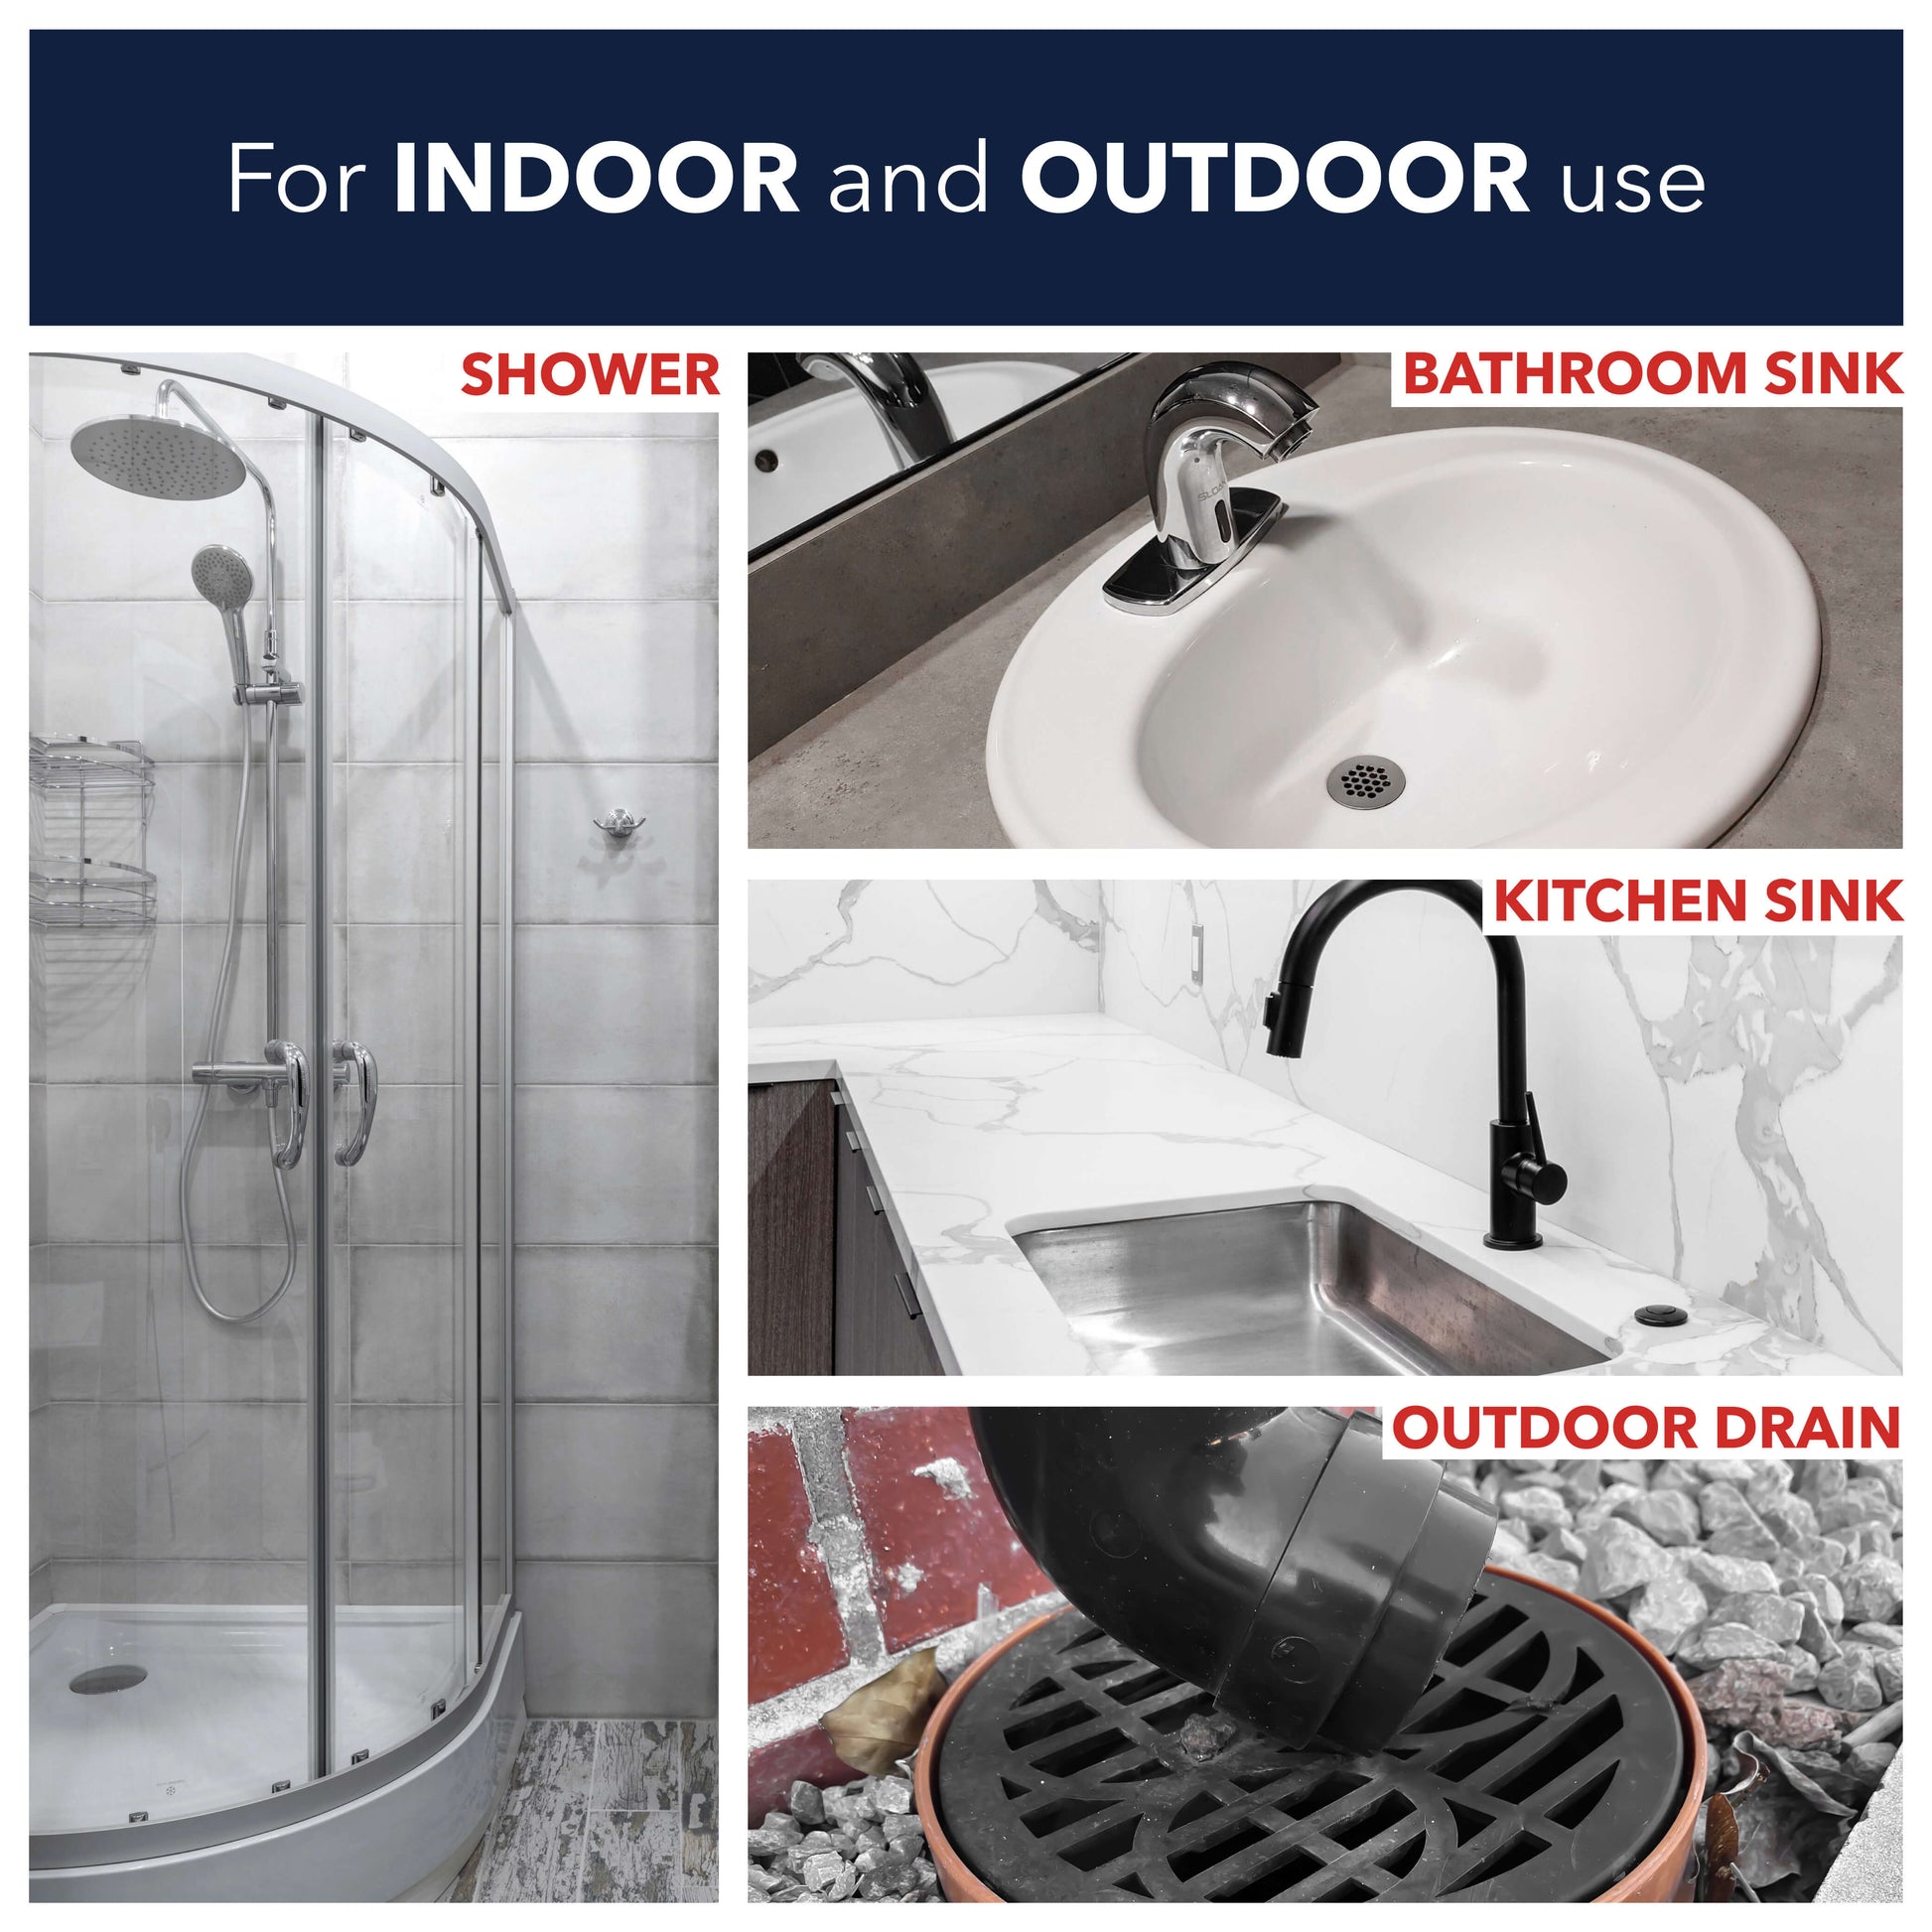 For indoor and outdoor use including showers, bathroom sinks, kitchen sinks and outdoor drains